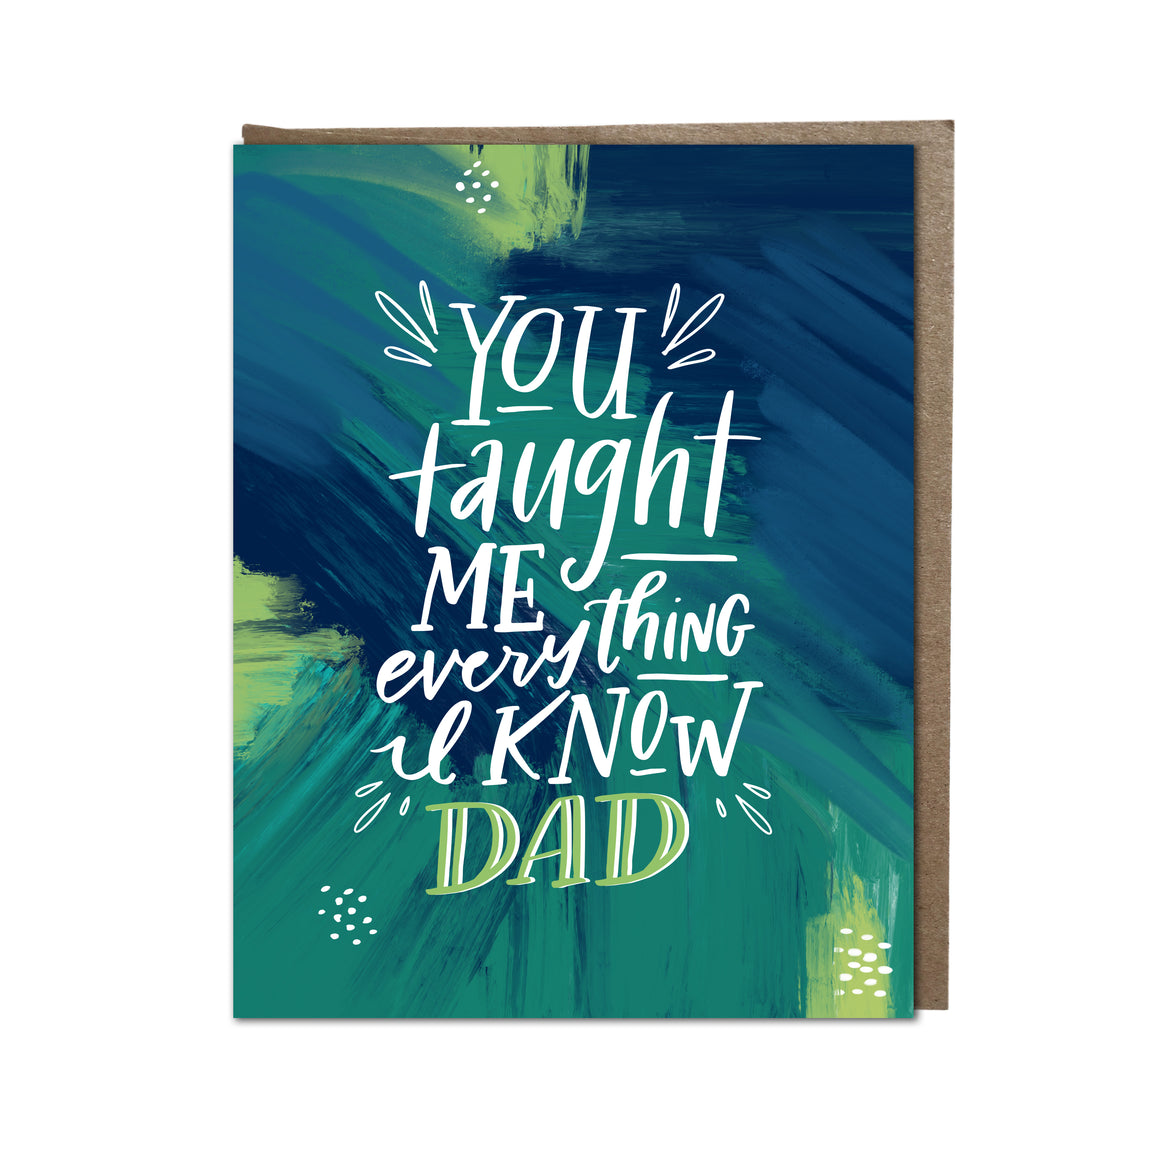 "You Taught Me Everything, Dad" card